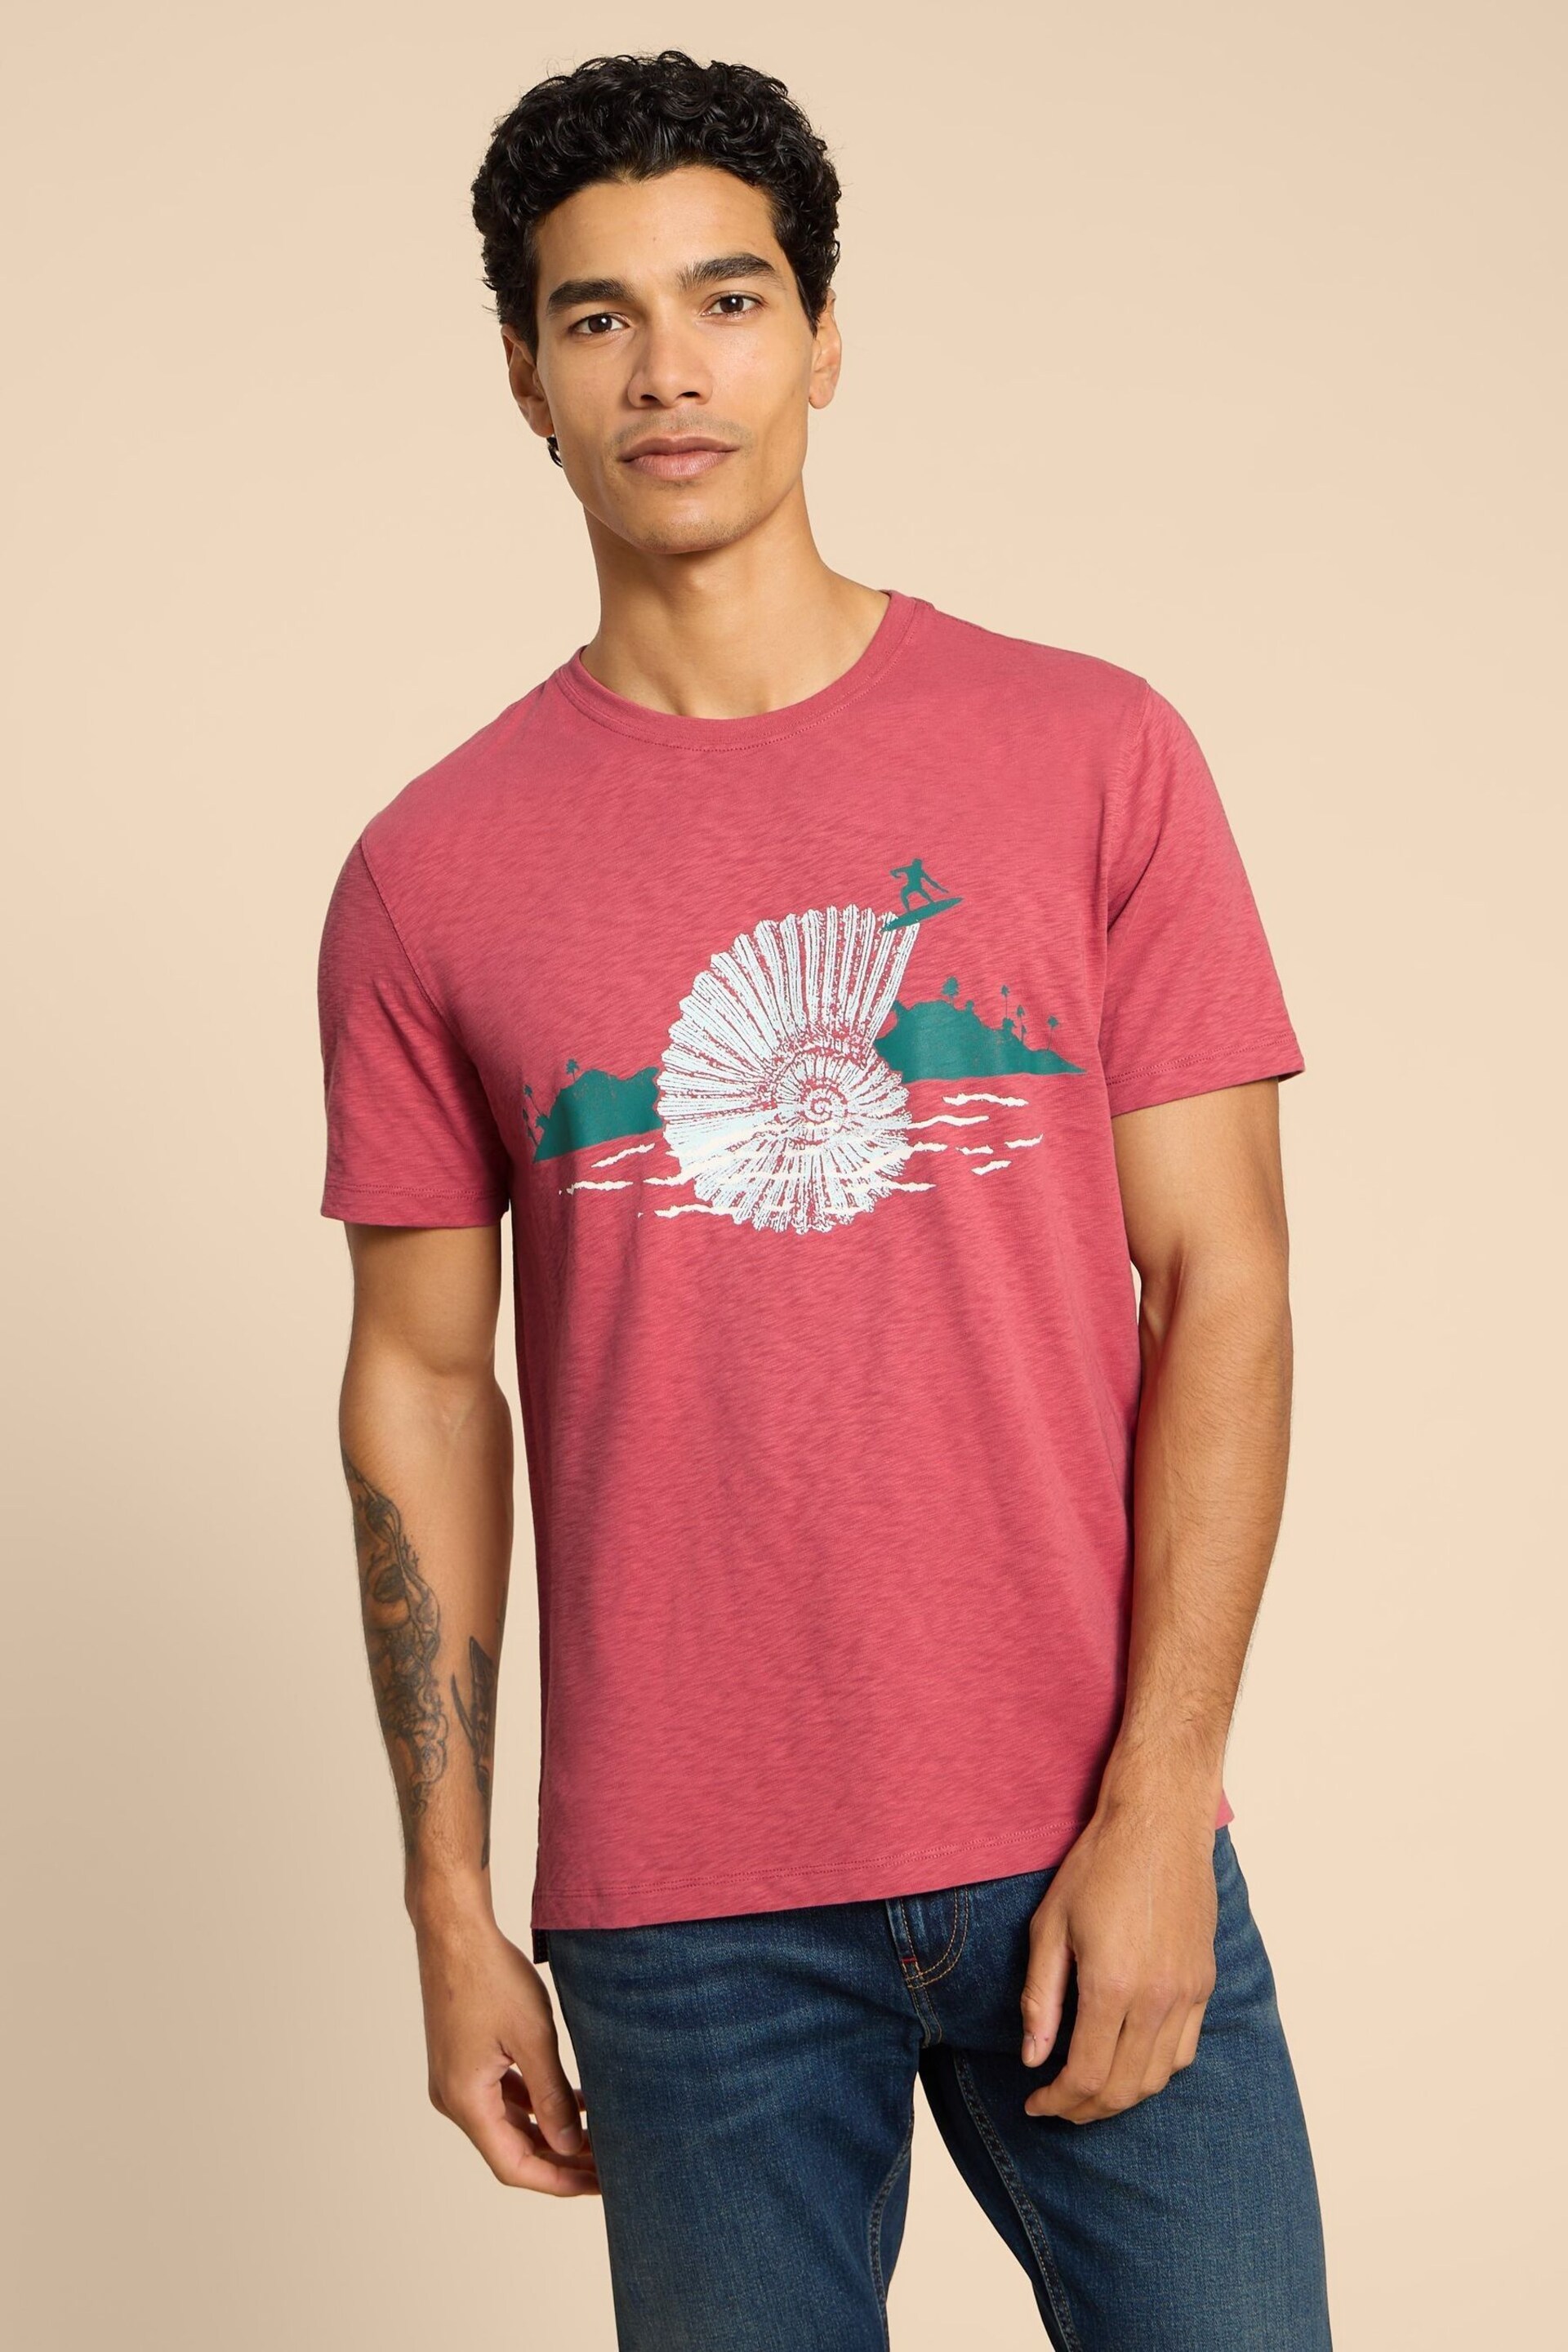 White Stuff Red Surf Shell Graphic T-Shirt - Image 1 of 7